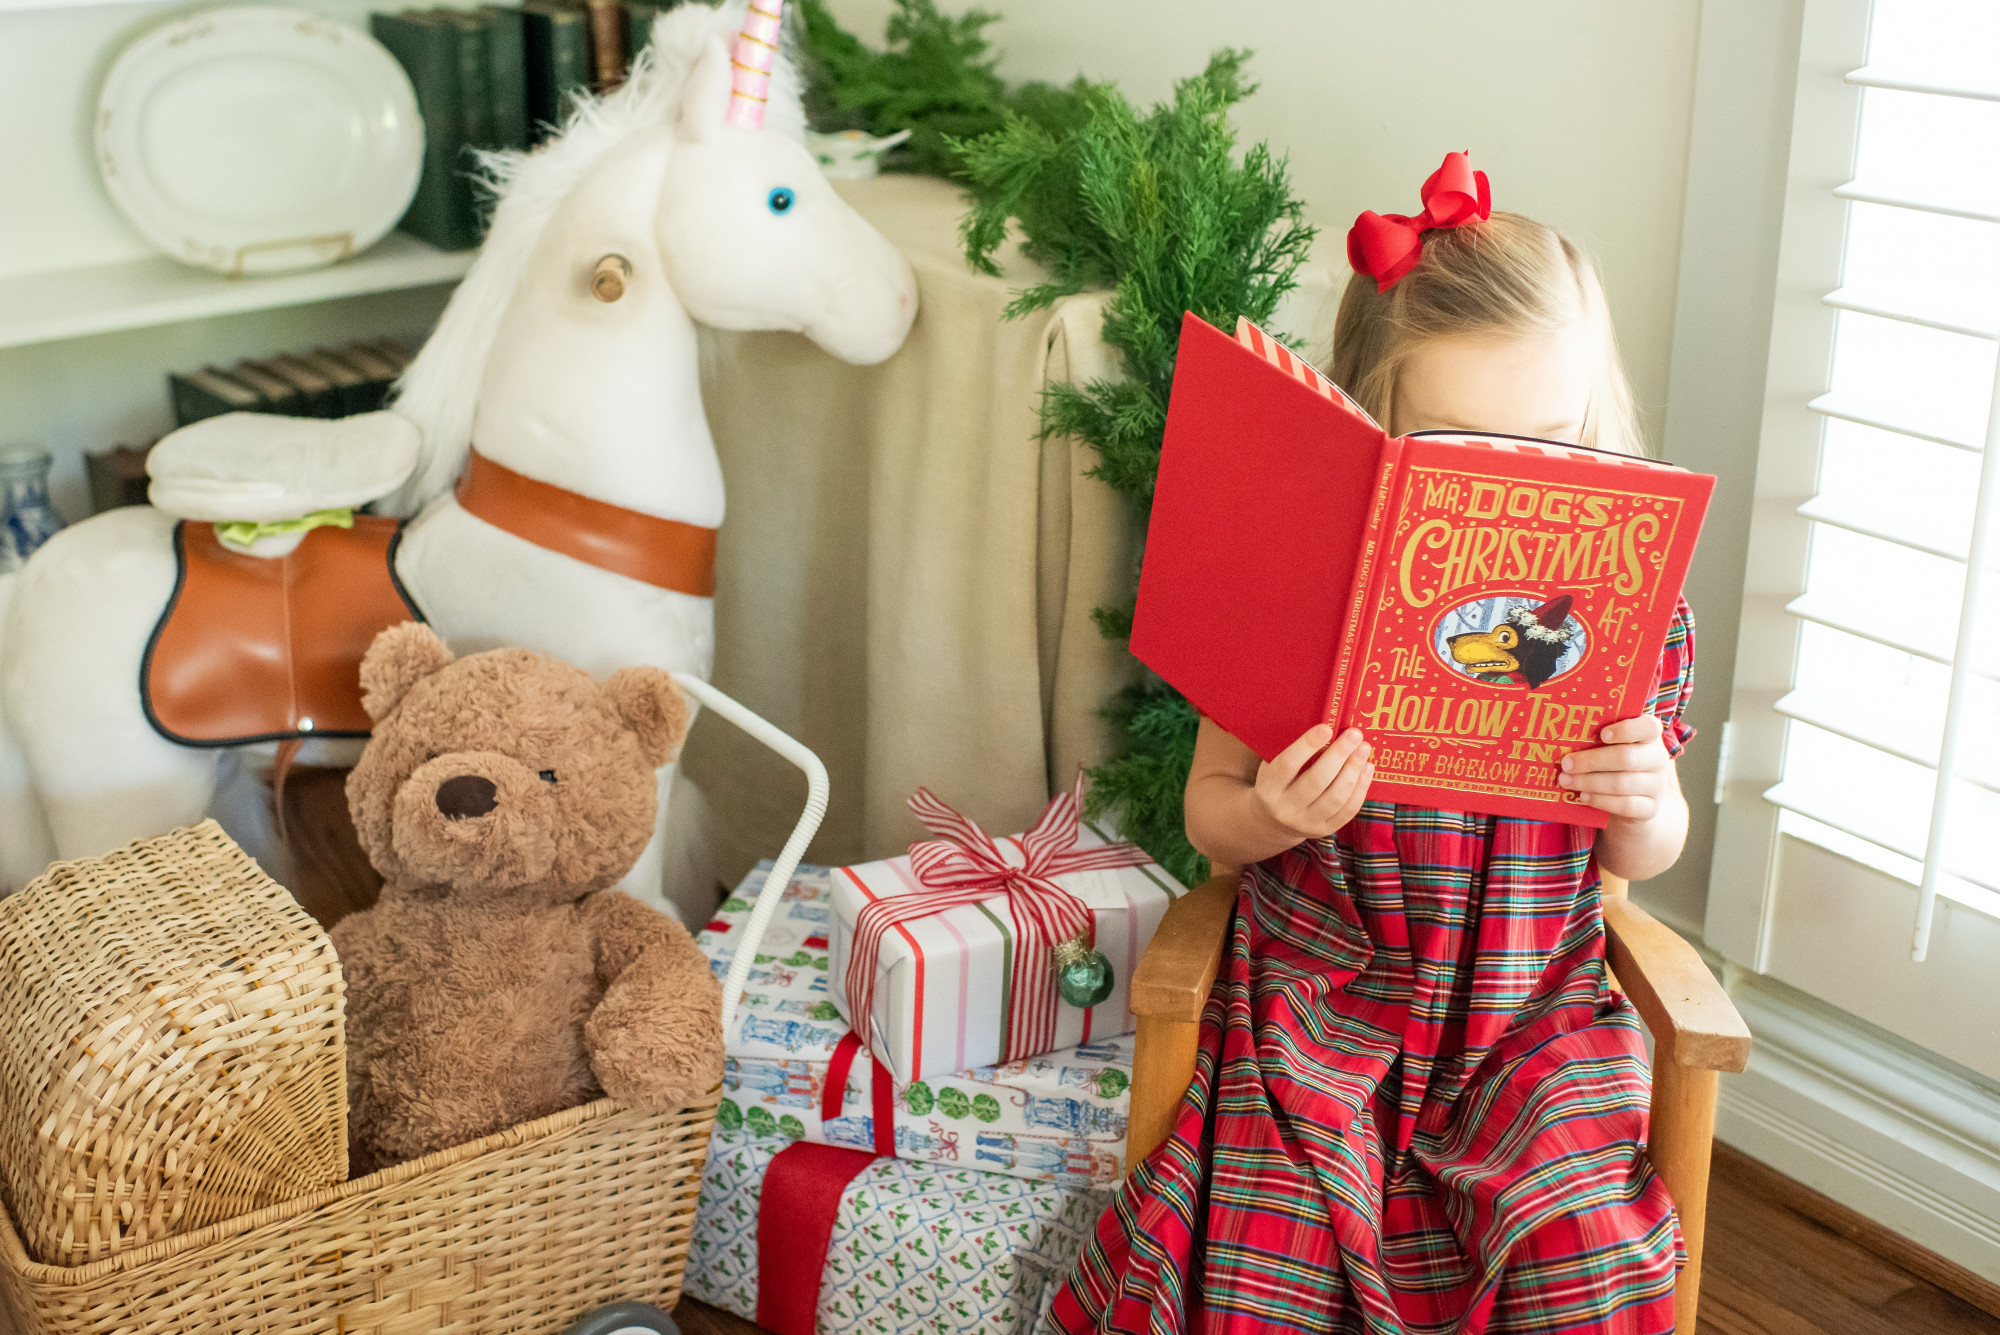 Girl Reading Christmas Book next to wrapped gifts